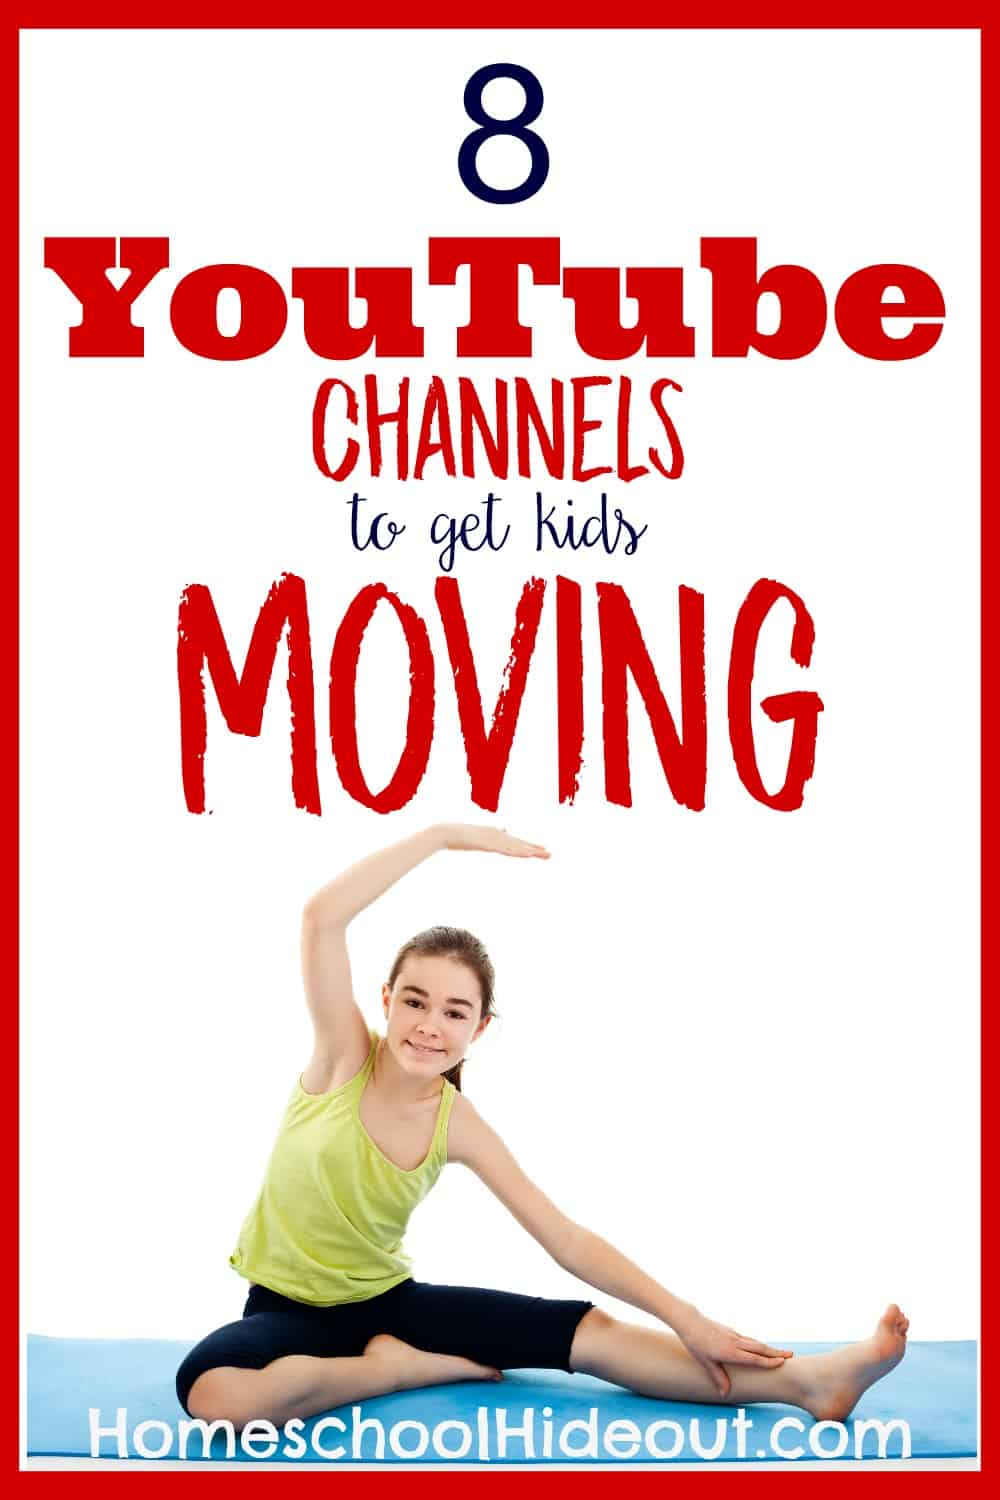 Fun list of quick and easy homeschool PE channels. I hadn't heard of most of these. Great way to release some energy when you can't get outside.